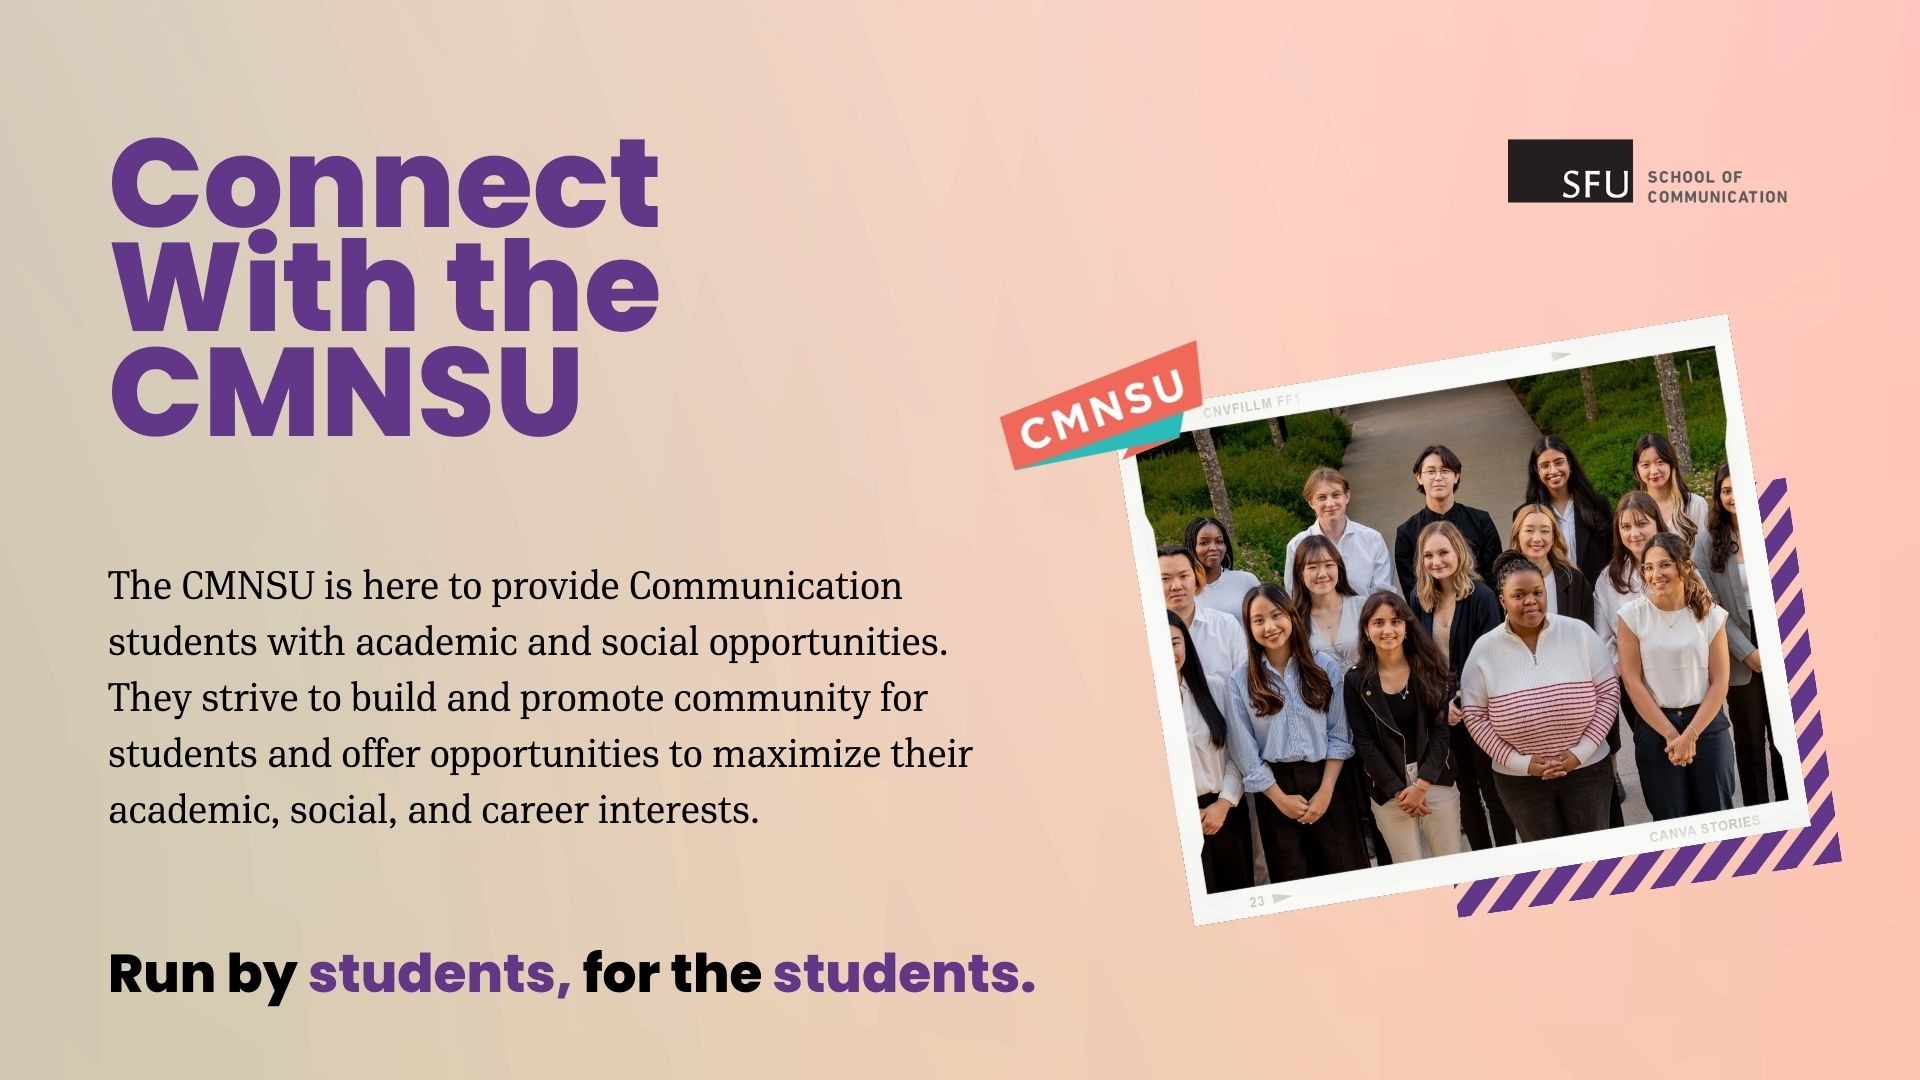 Connect With the CMNSU